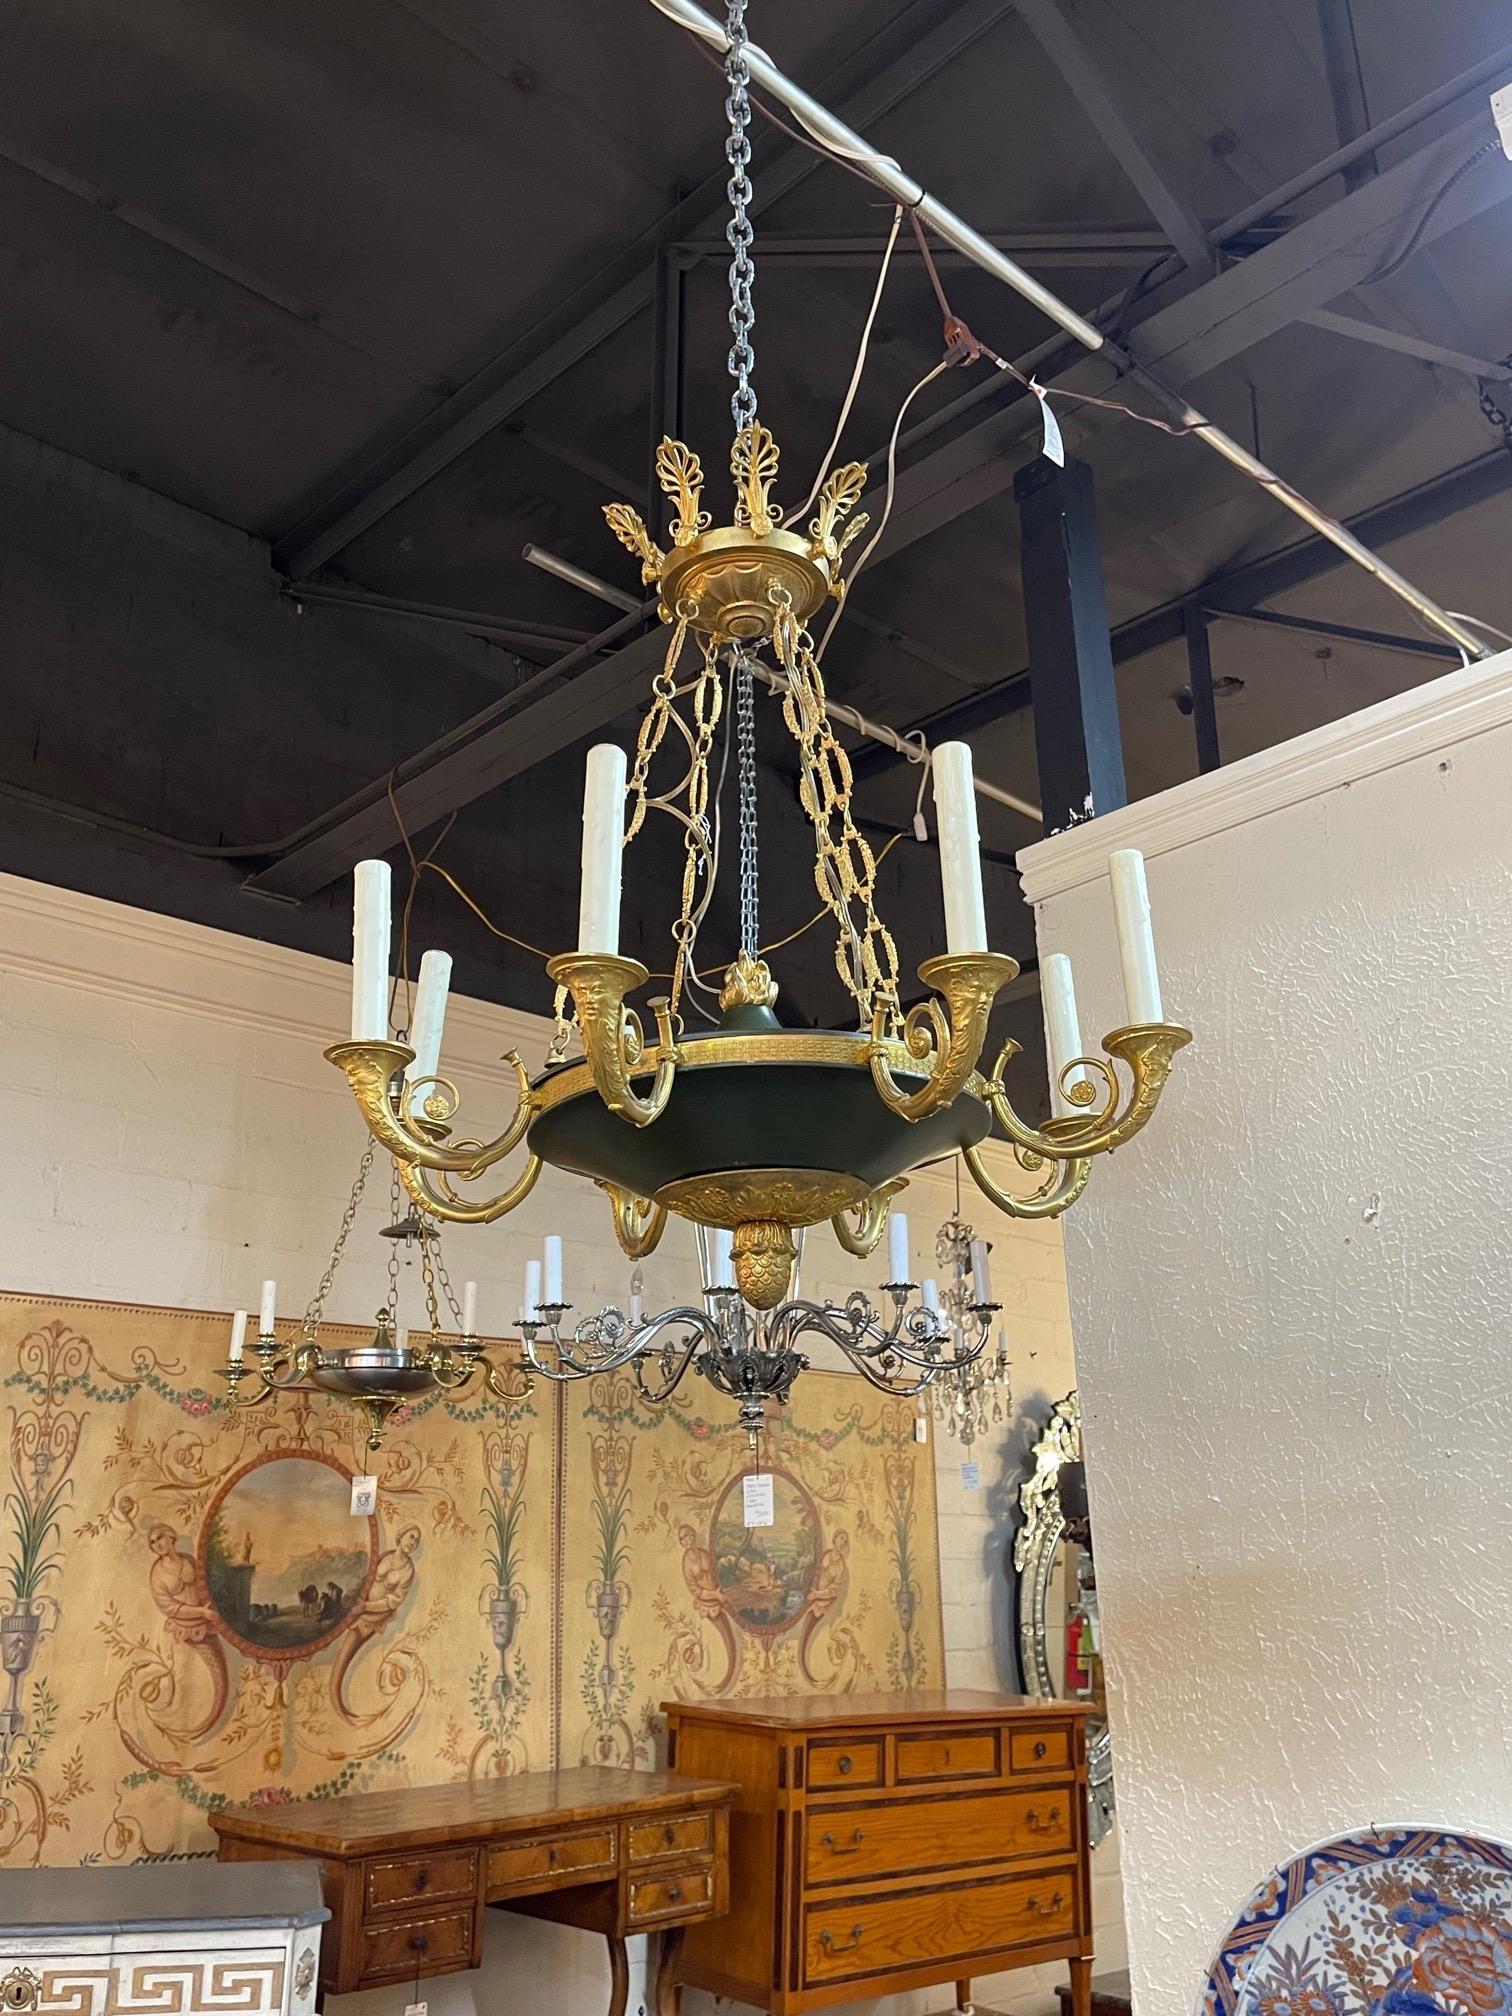 Handsome 19th century Empire style gilt bronze 8 light chandelier. Beautiful decorative details on the bronze. A classic style and very fine quality!!